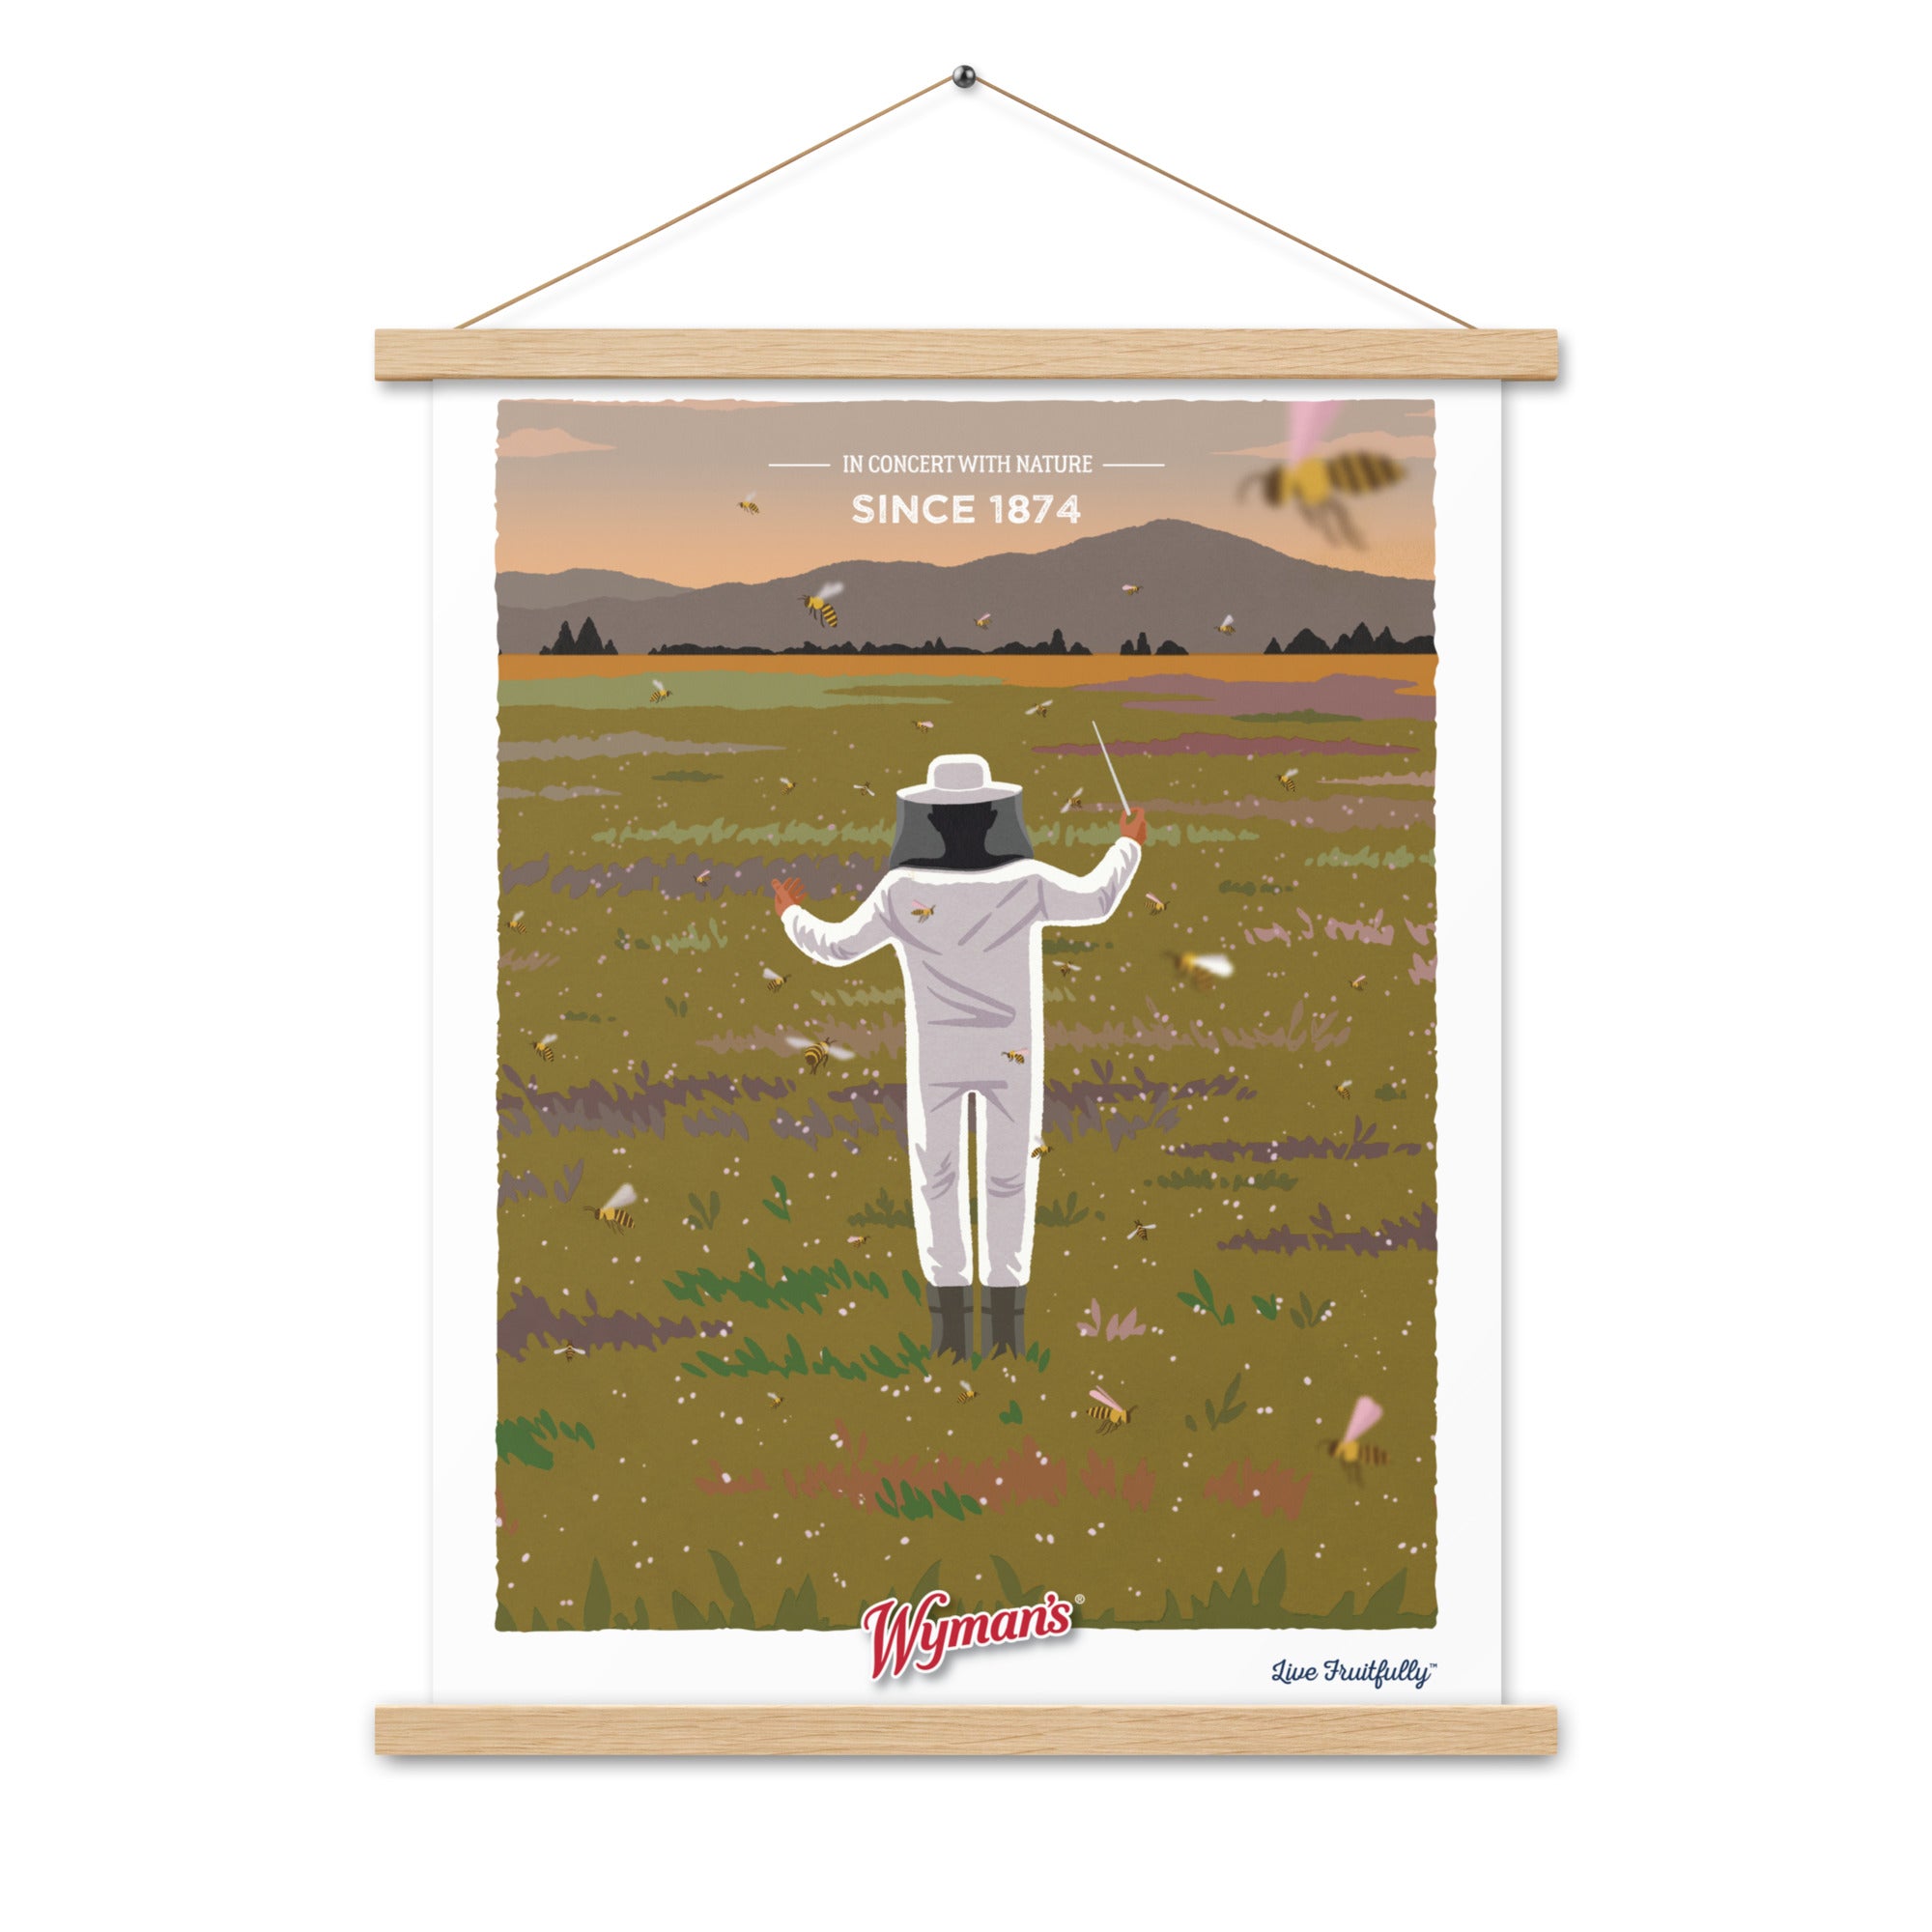 A Shop Wyman's In Concert with Nature Since 1874 Poster with a custom display of a man in a bee suit flying in a field, featuring premium printing finishes.